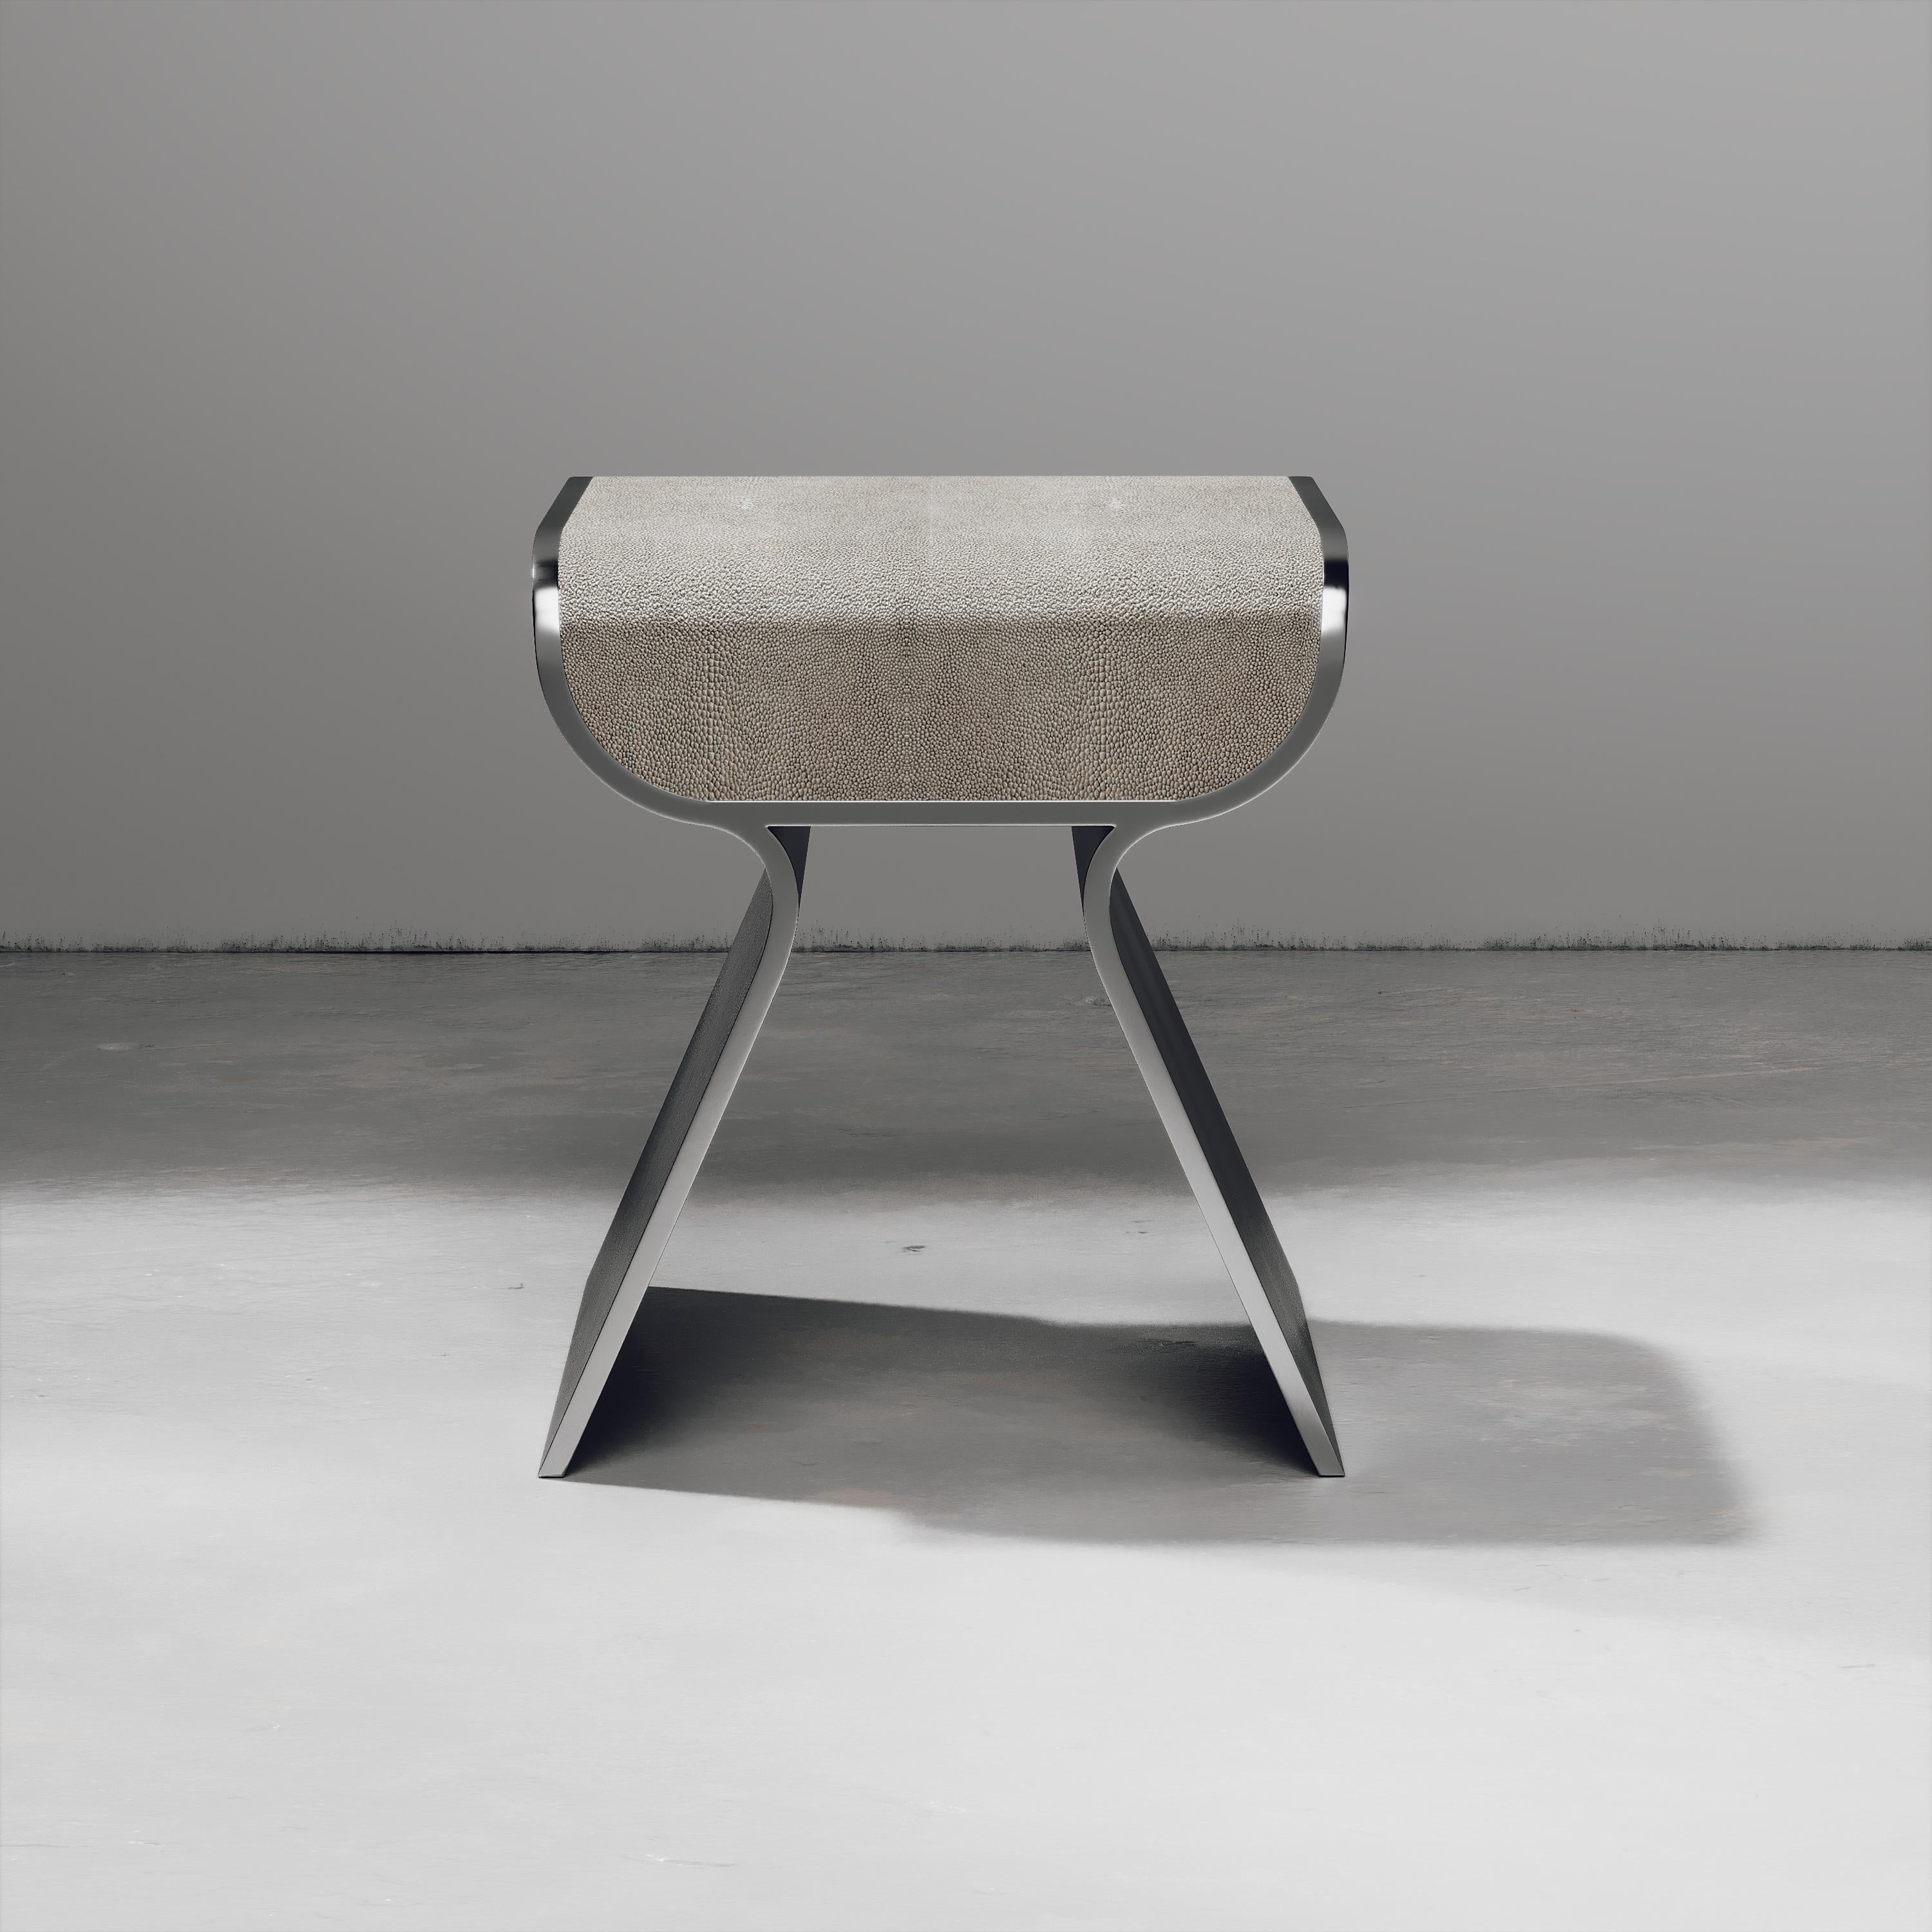 The dandy stool inlaid in cream shagreen is a chic seating piece for any space. The sides of the pieces are completely inlaid in polished steel adding another luxurious and modern element to the piece. Available in other finishes and as a bench, see